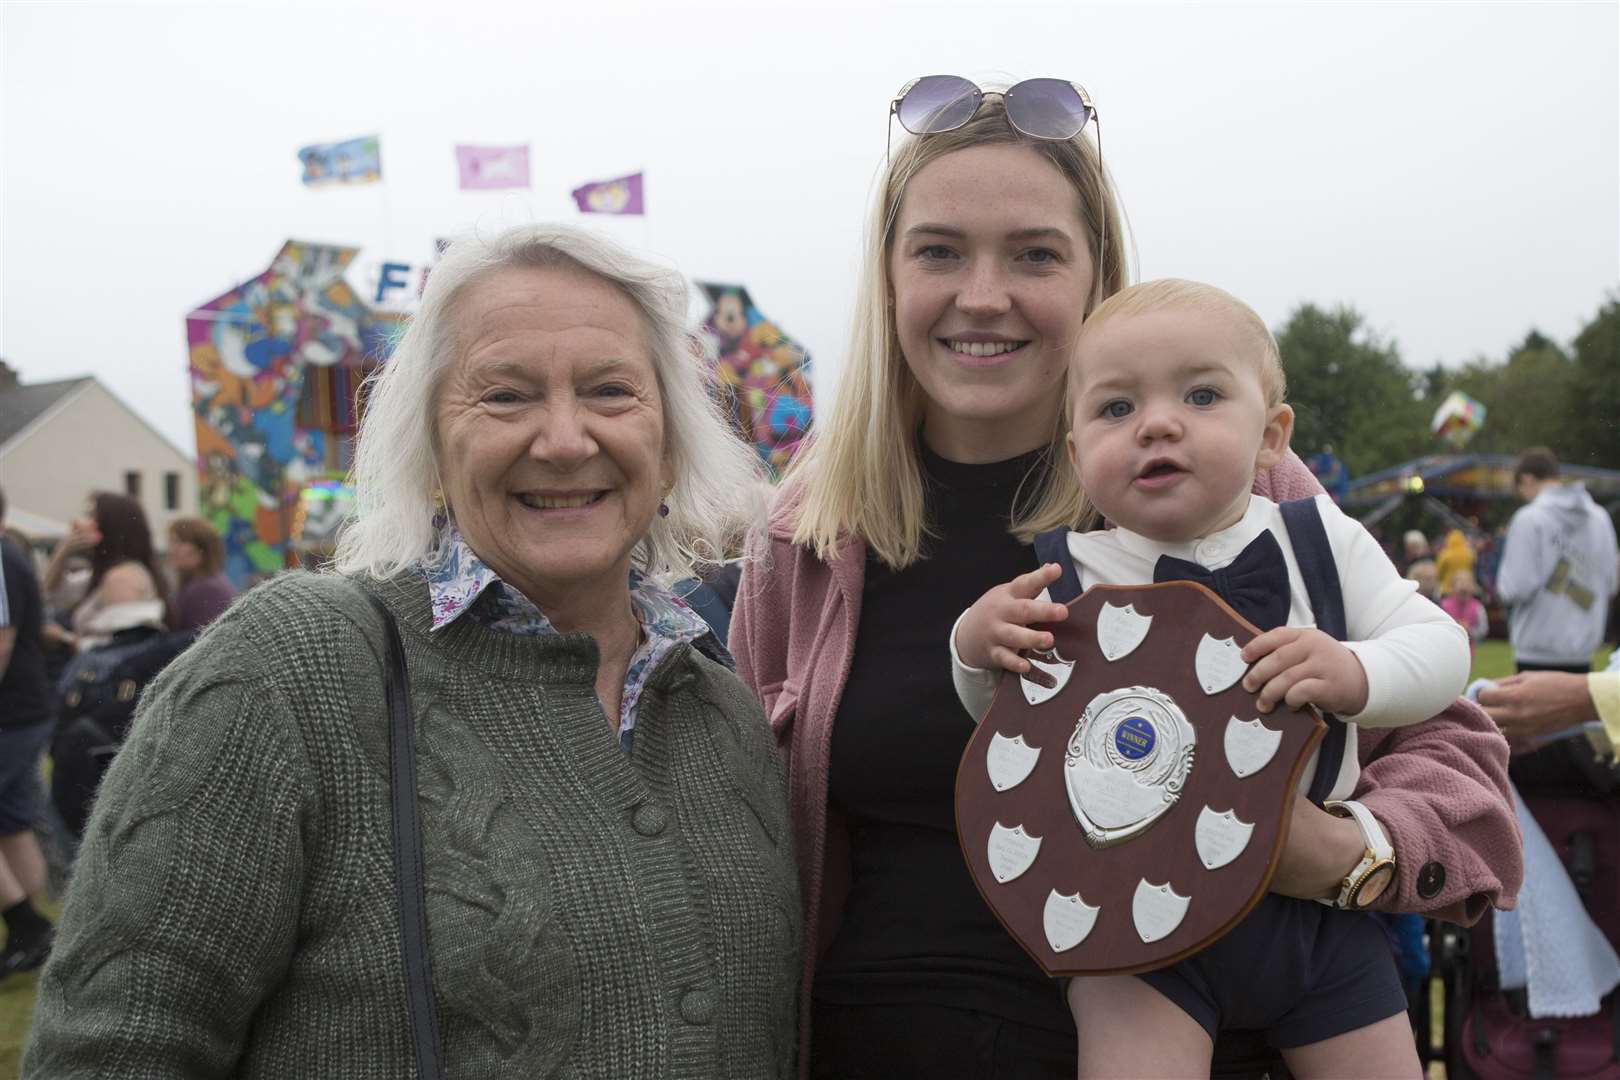 Ten-month-old Brody Henderson, from Hempriggs, won the baby show. He is seen here with his mum Zoe Harris and judge Lady Marion Thurso. Picture: Robert MacDonald/Northern Studios